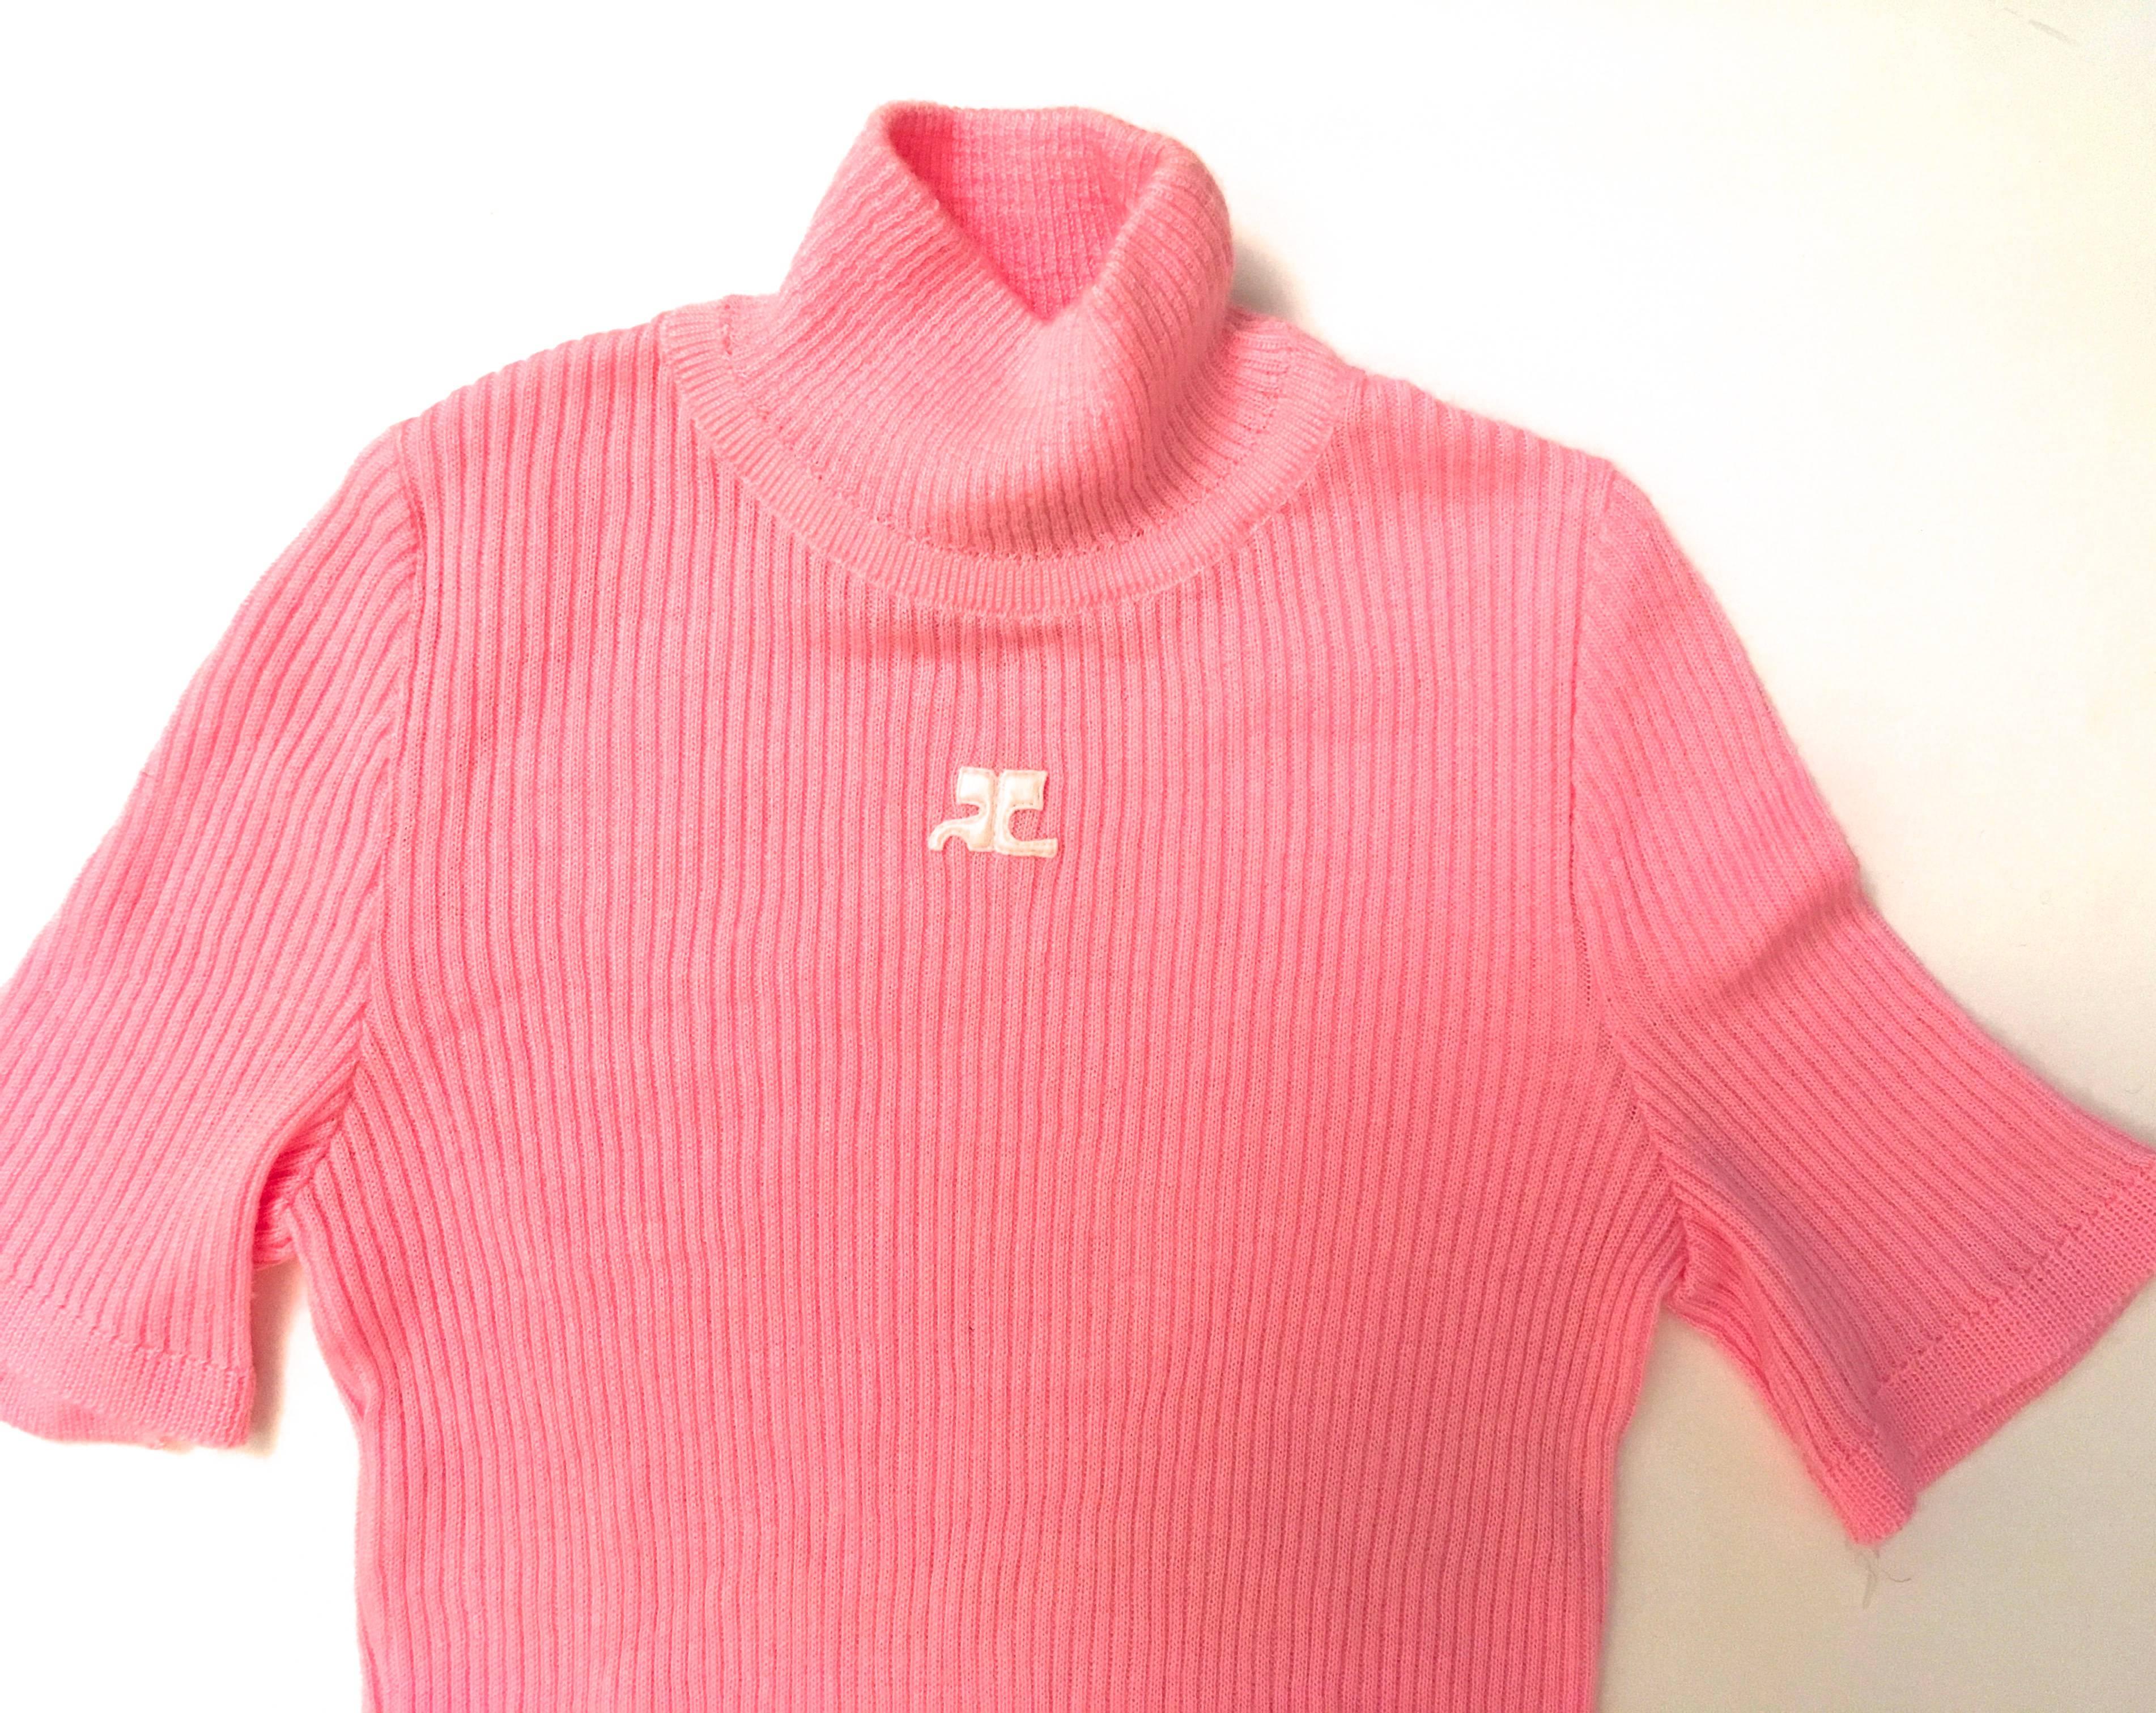 Courreges Sweater - Short Sleeve - Pink - 1970's - Mint Condition For Sale 2